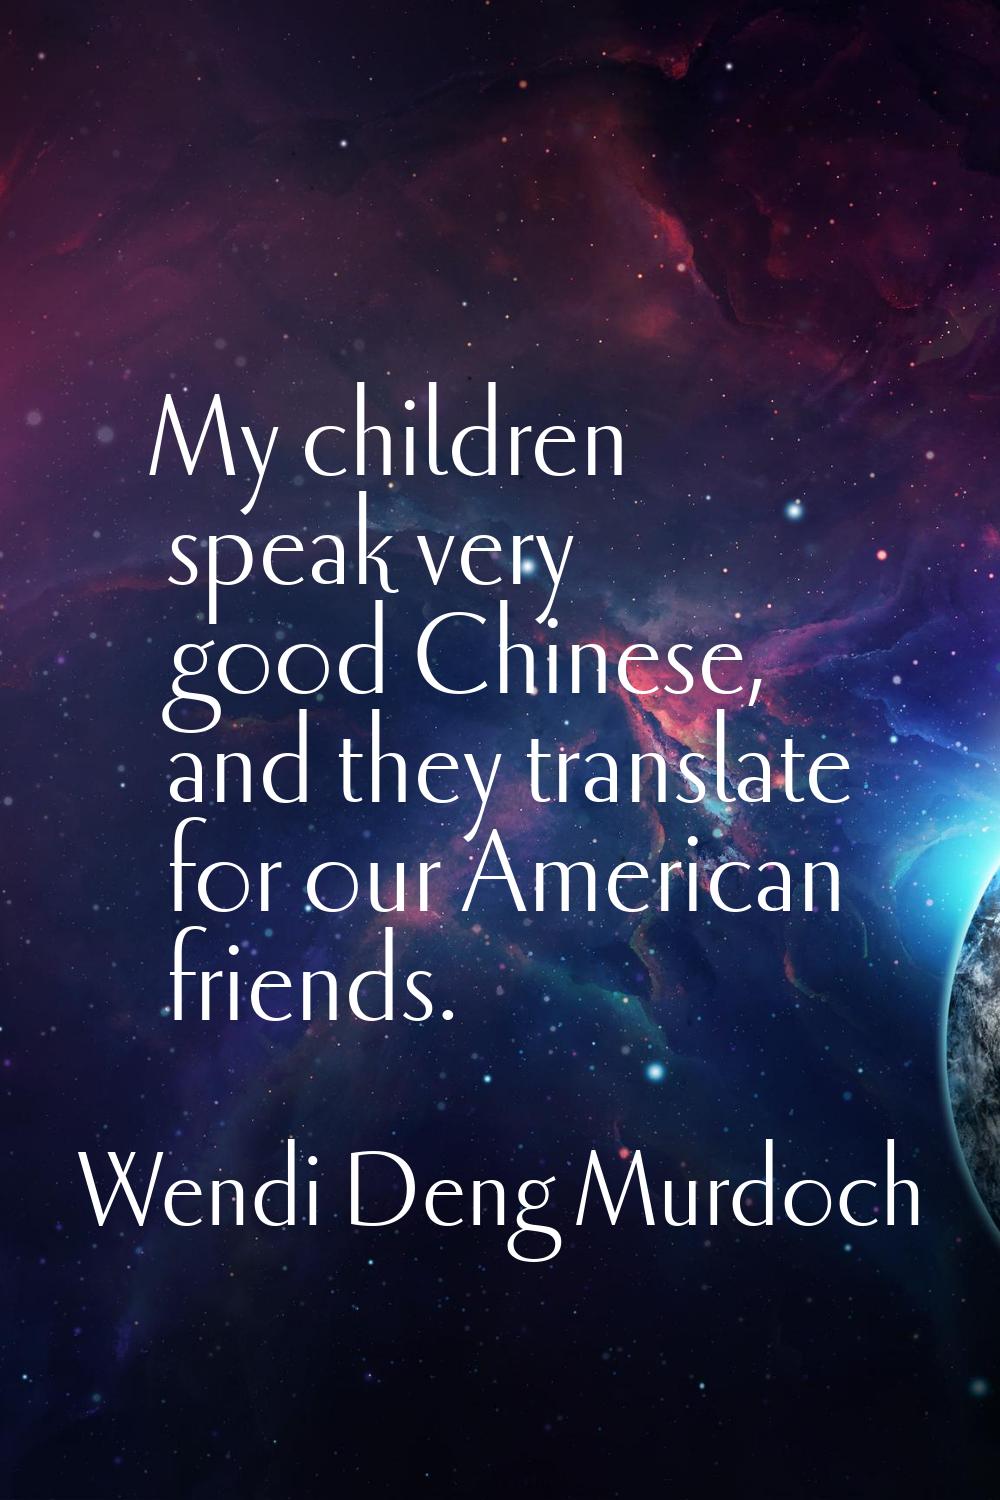 My children speak very good Chinese, and they translate for our American friends.